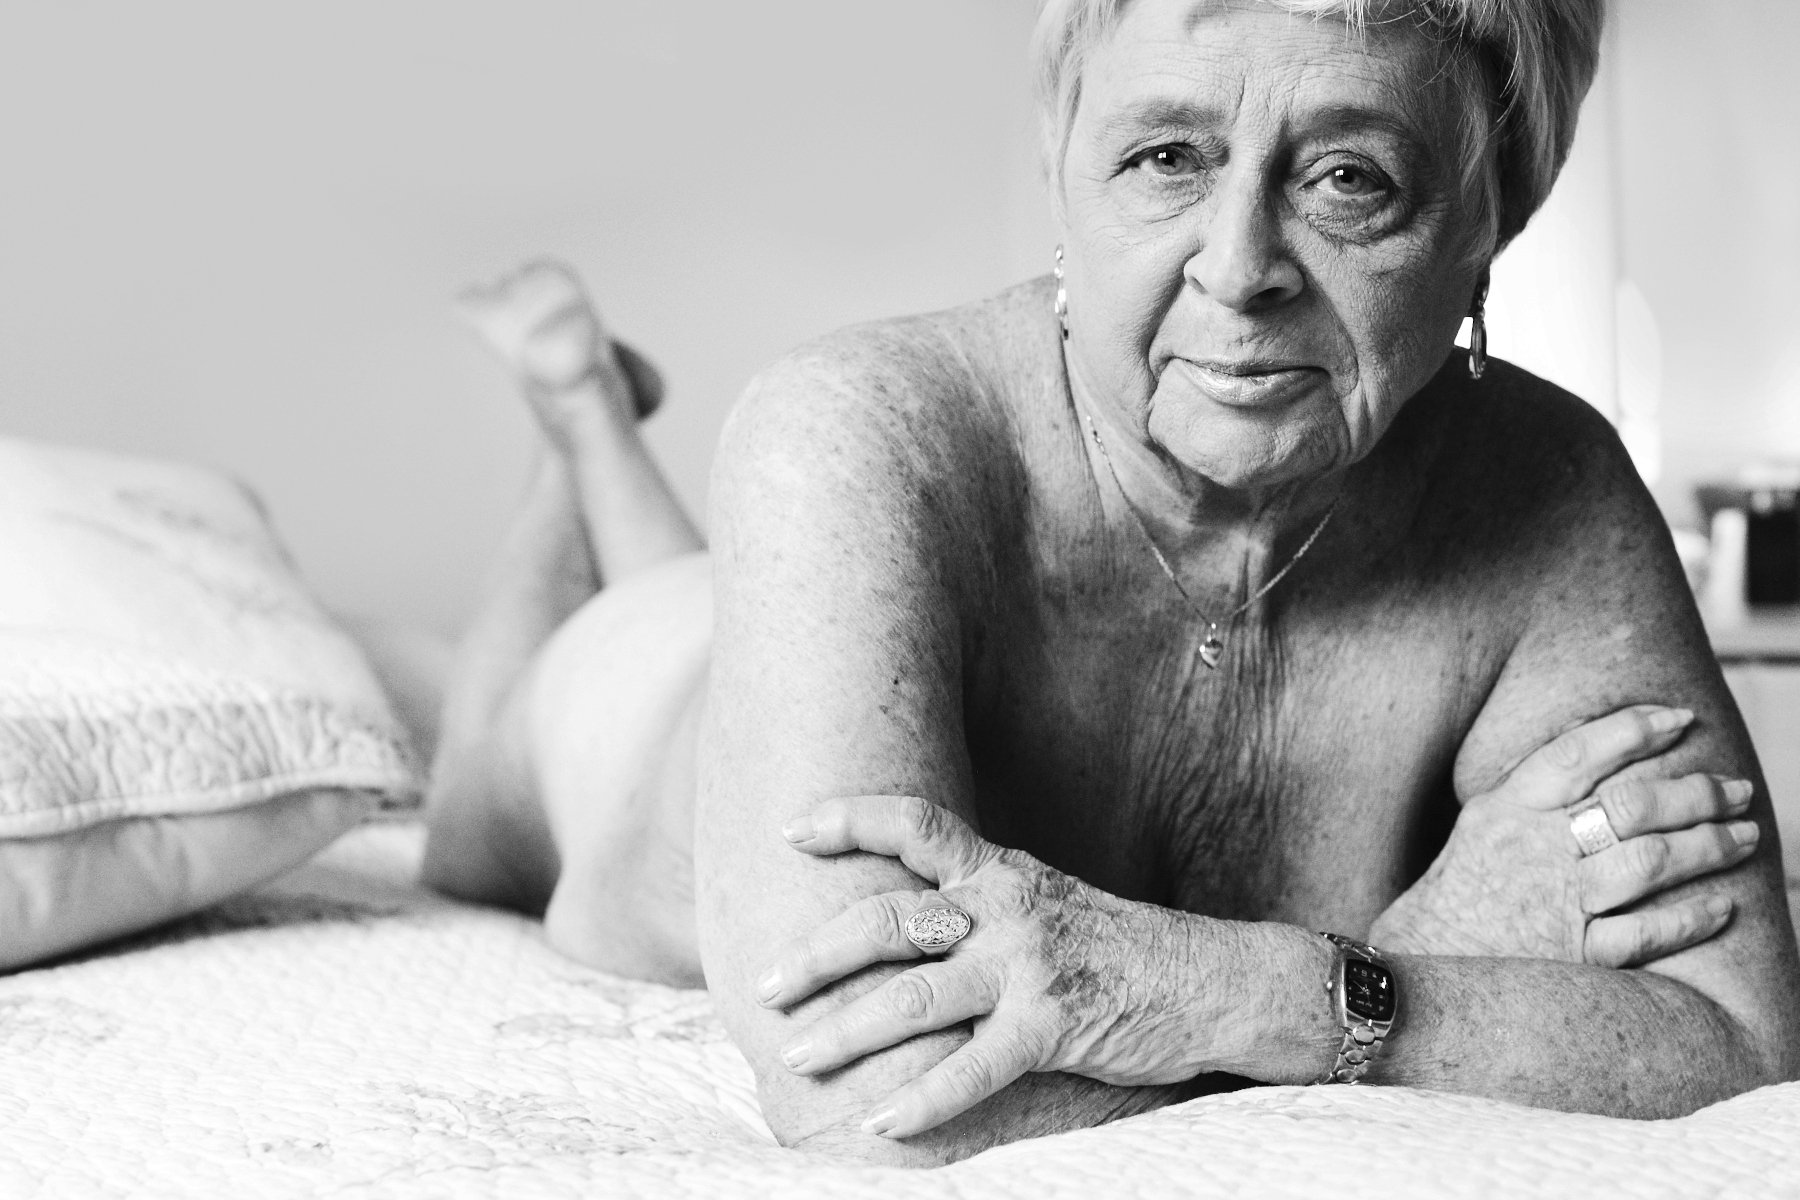 Alluring as ever: nude photos of men over 60